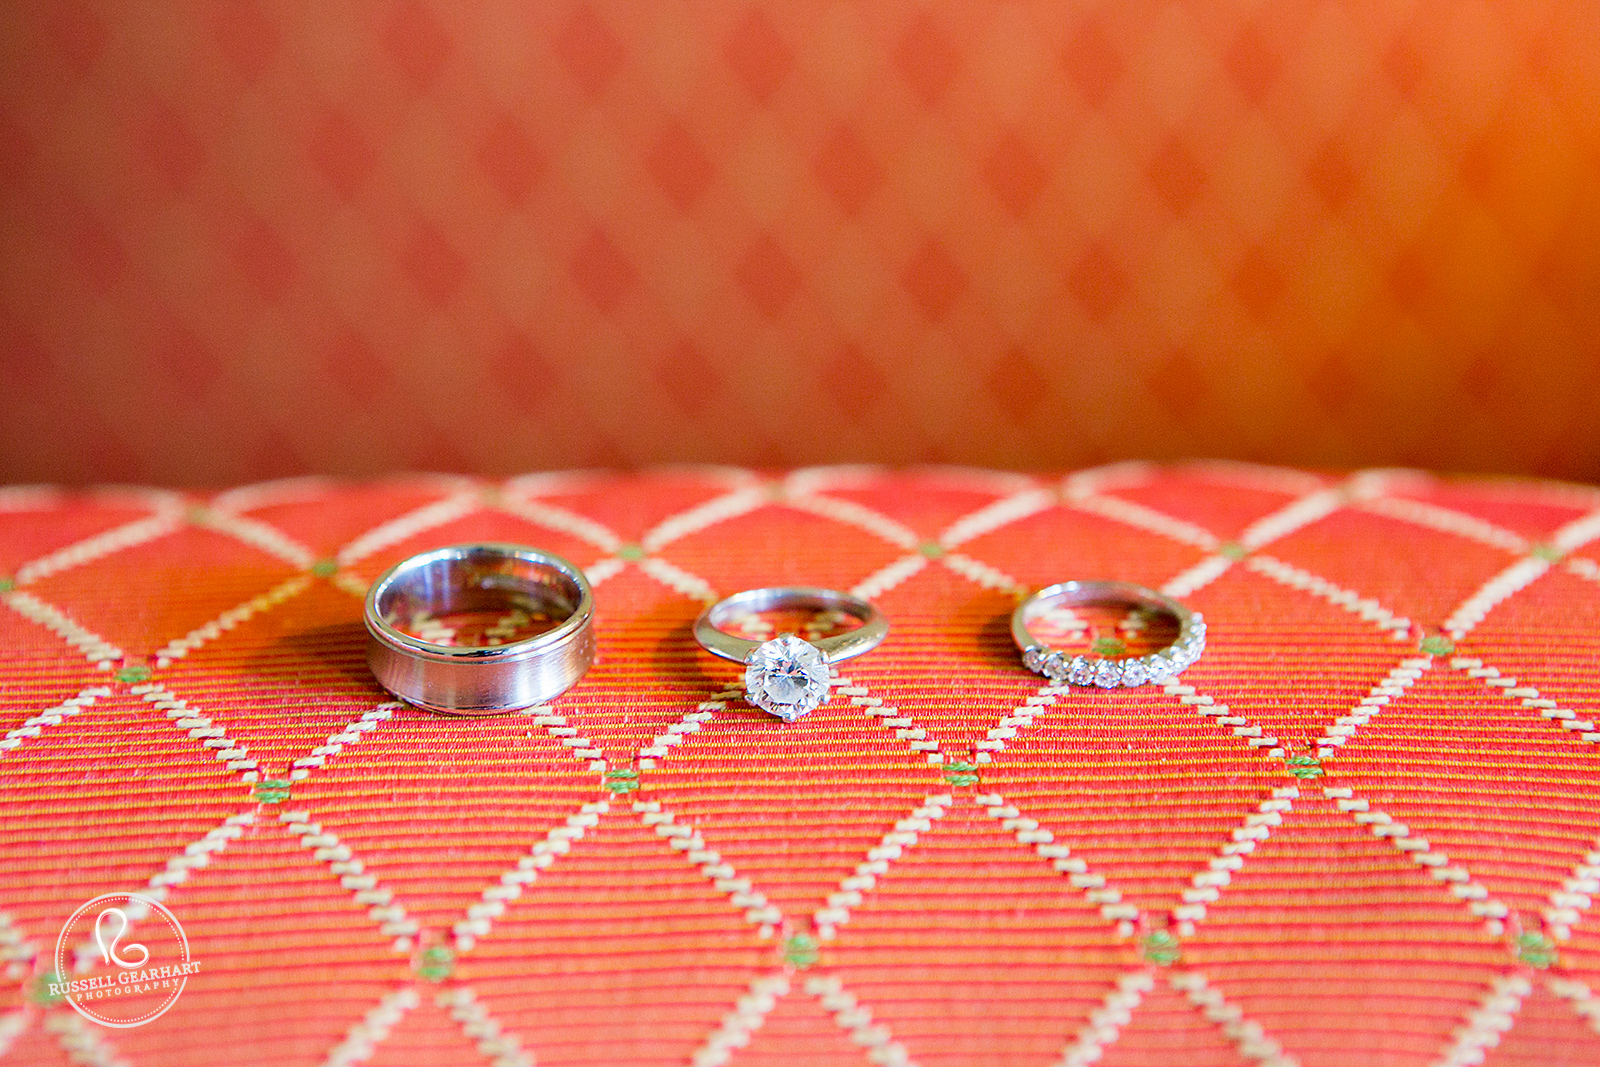 Wedding Rings on Orange Pillow – Pueblo Bonito Sunset Beach Wedding – Russell Gearhart Photography – www.gearhartphoto.com